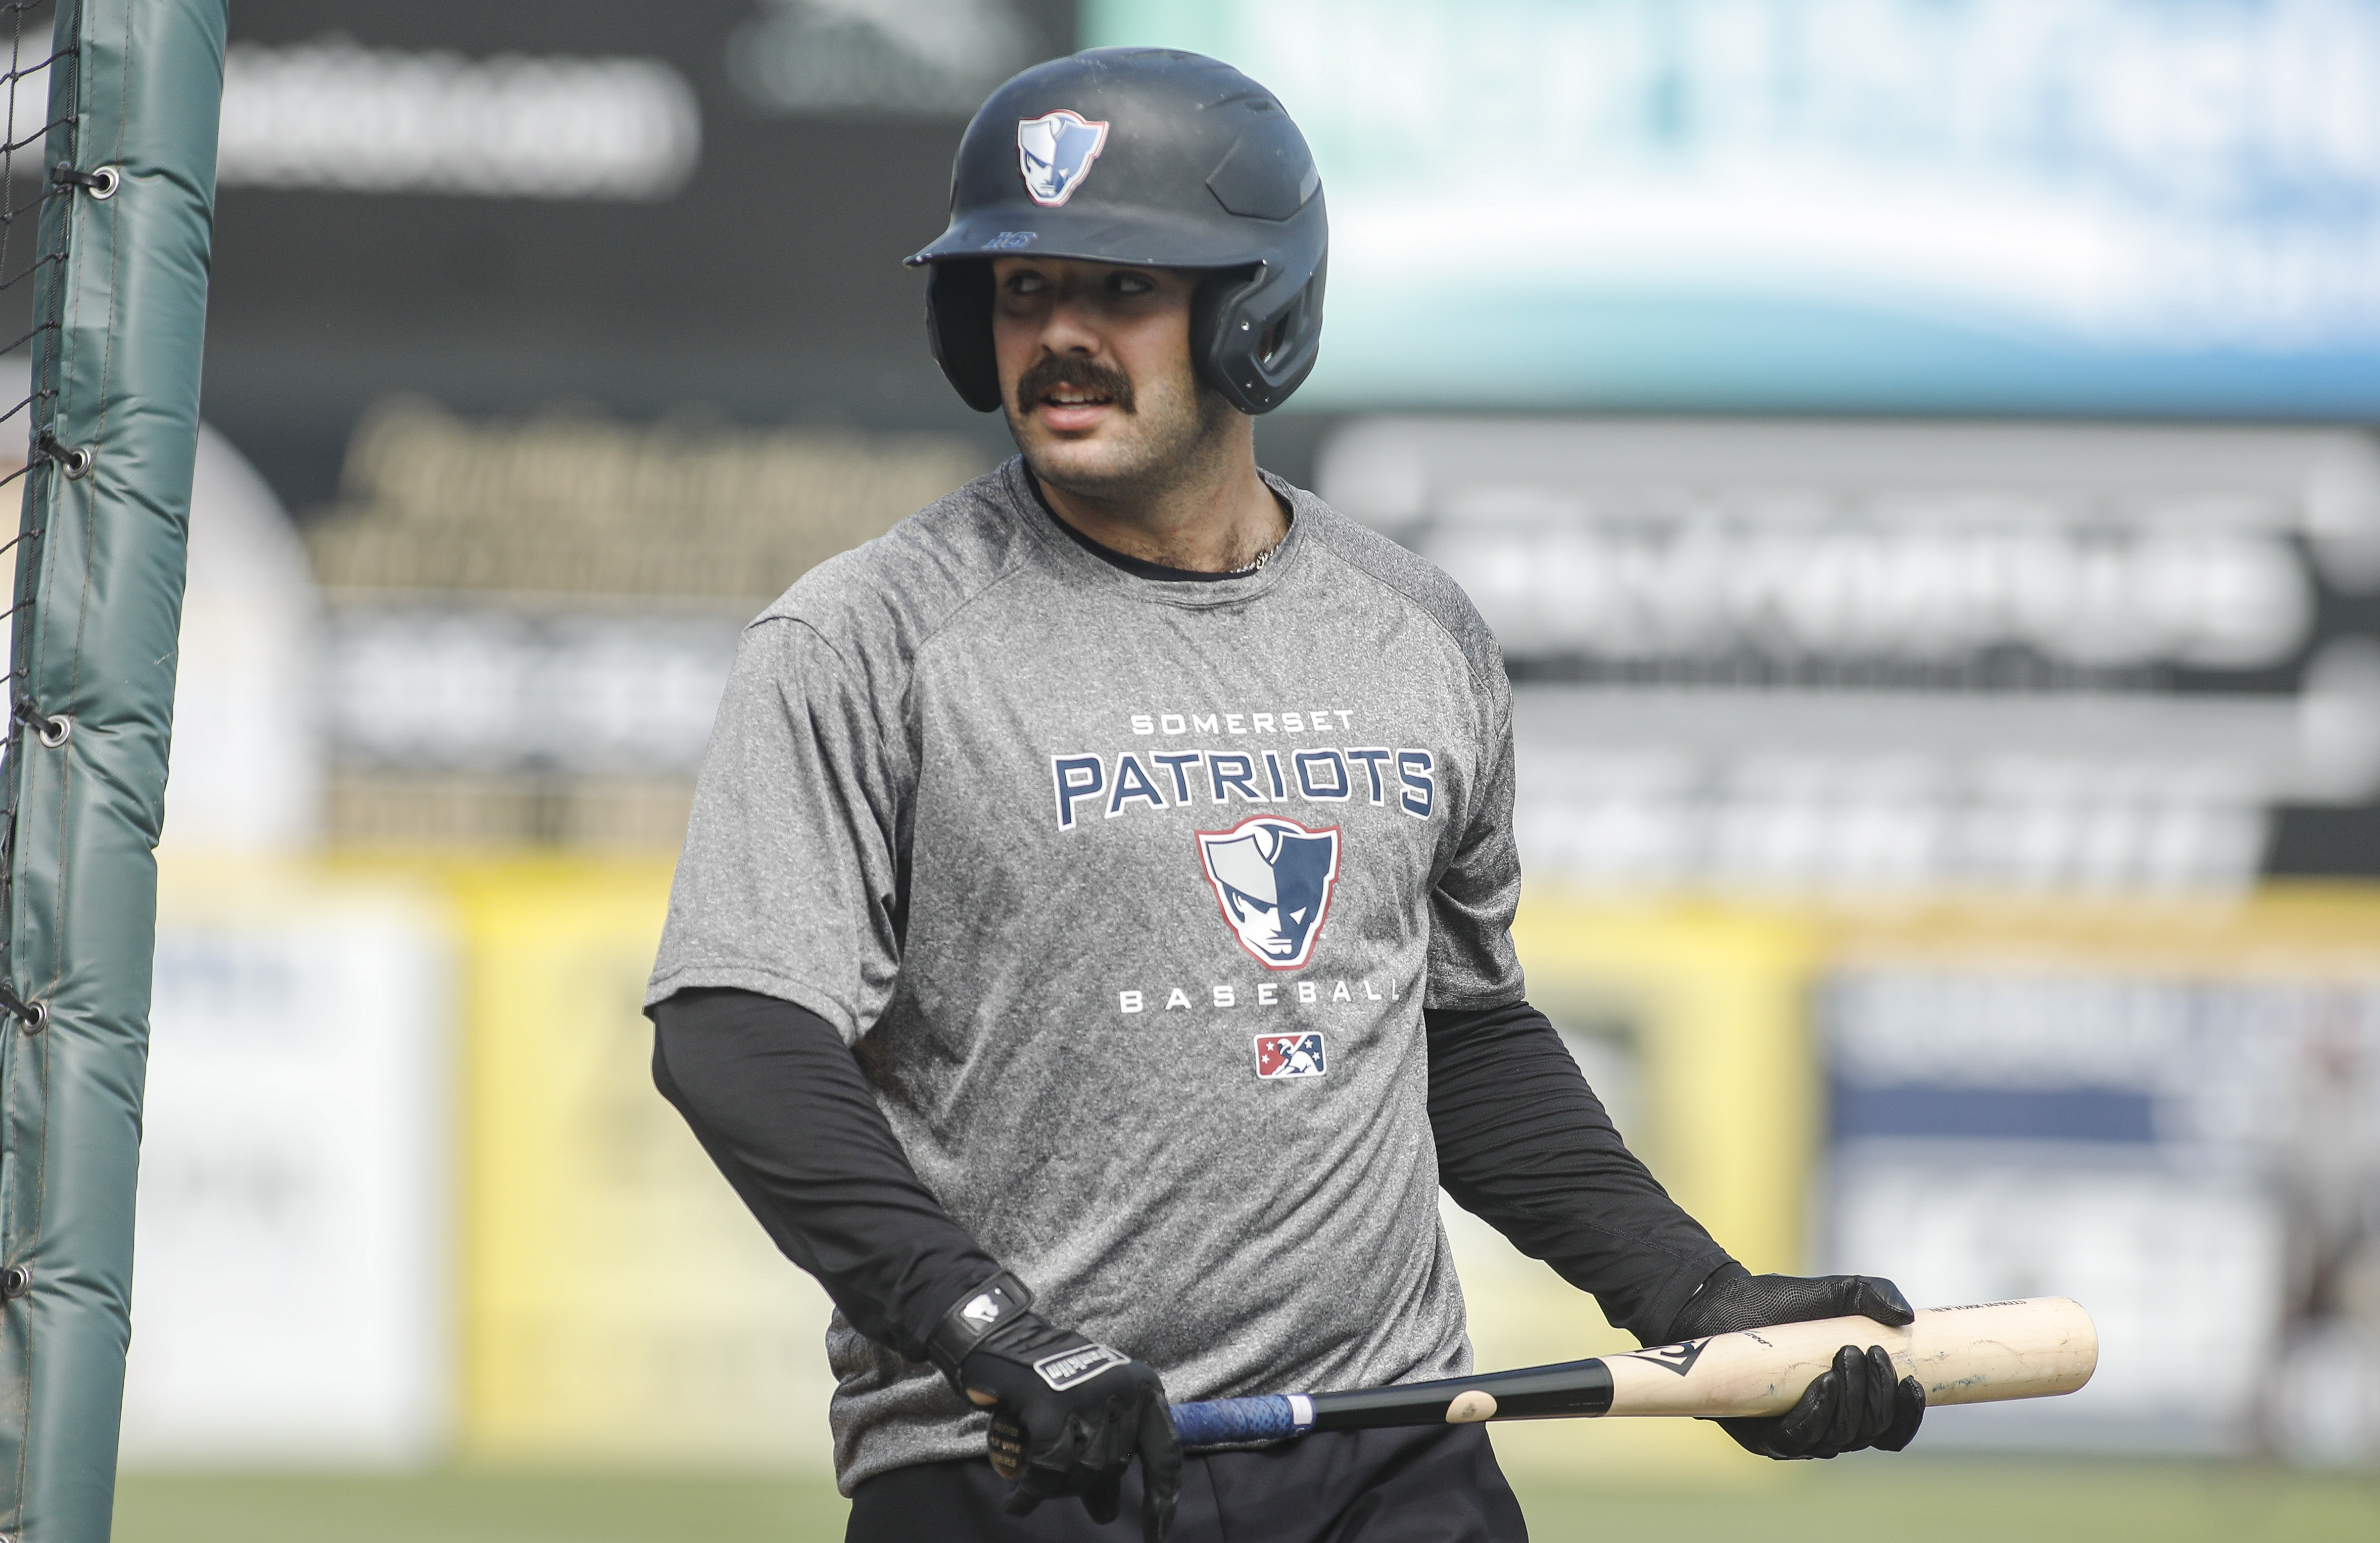 New York Yankees top prospects Anthony Volpe and Austin Wells together with Somerset Patriots